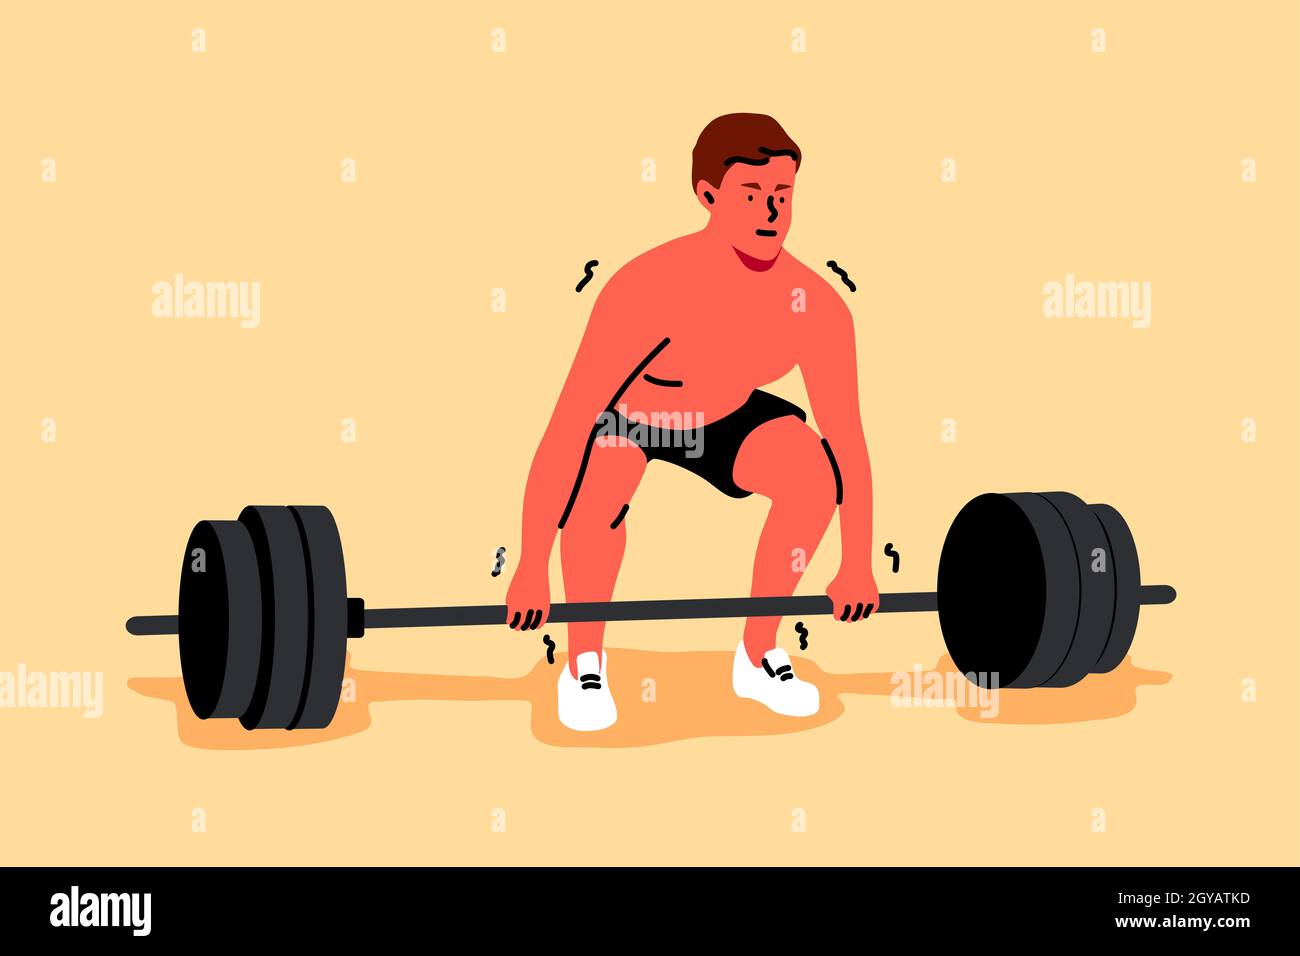 Training, sport, lifting, strength, fitness concept. Young strong man or  guy athlete cartoon character preparing to lift barbells with high weight.  Ac Stock Photo - Alamy